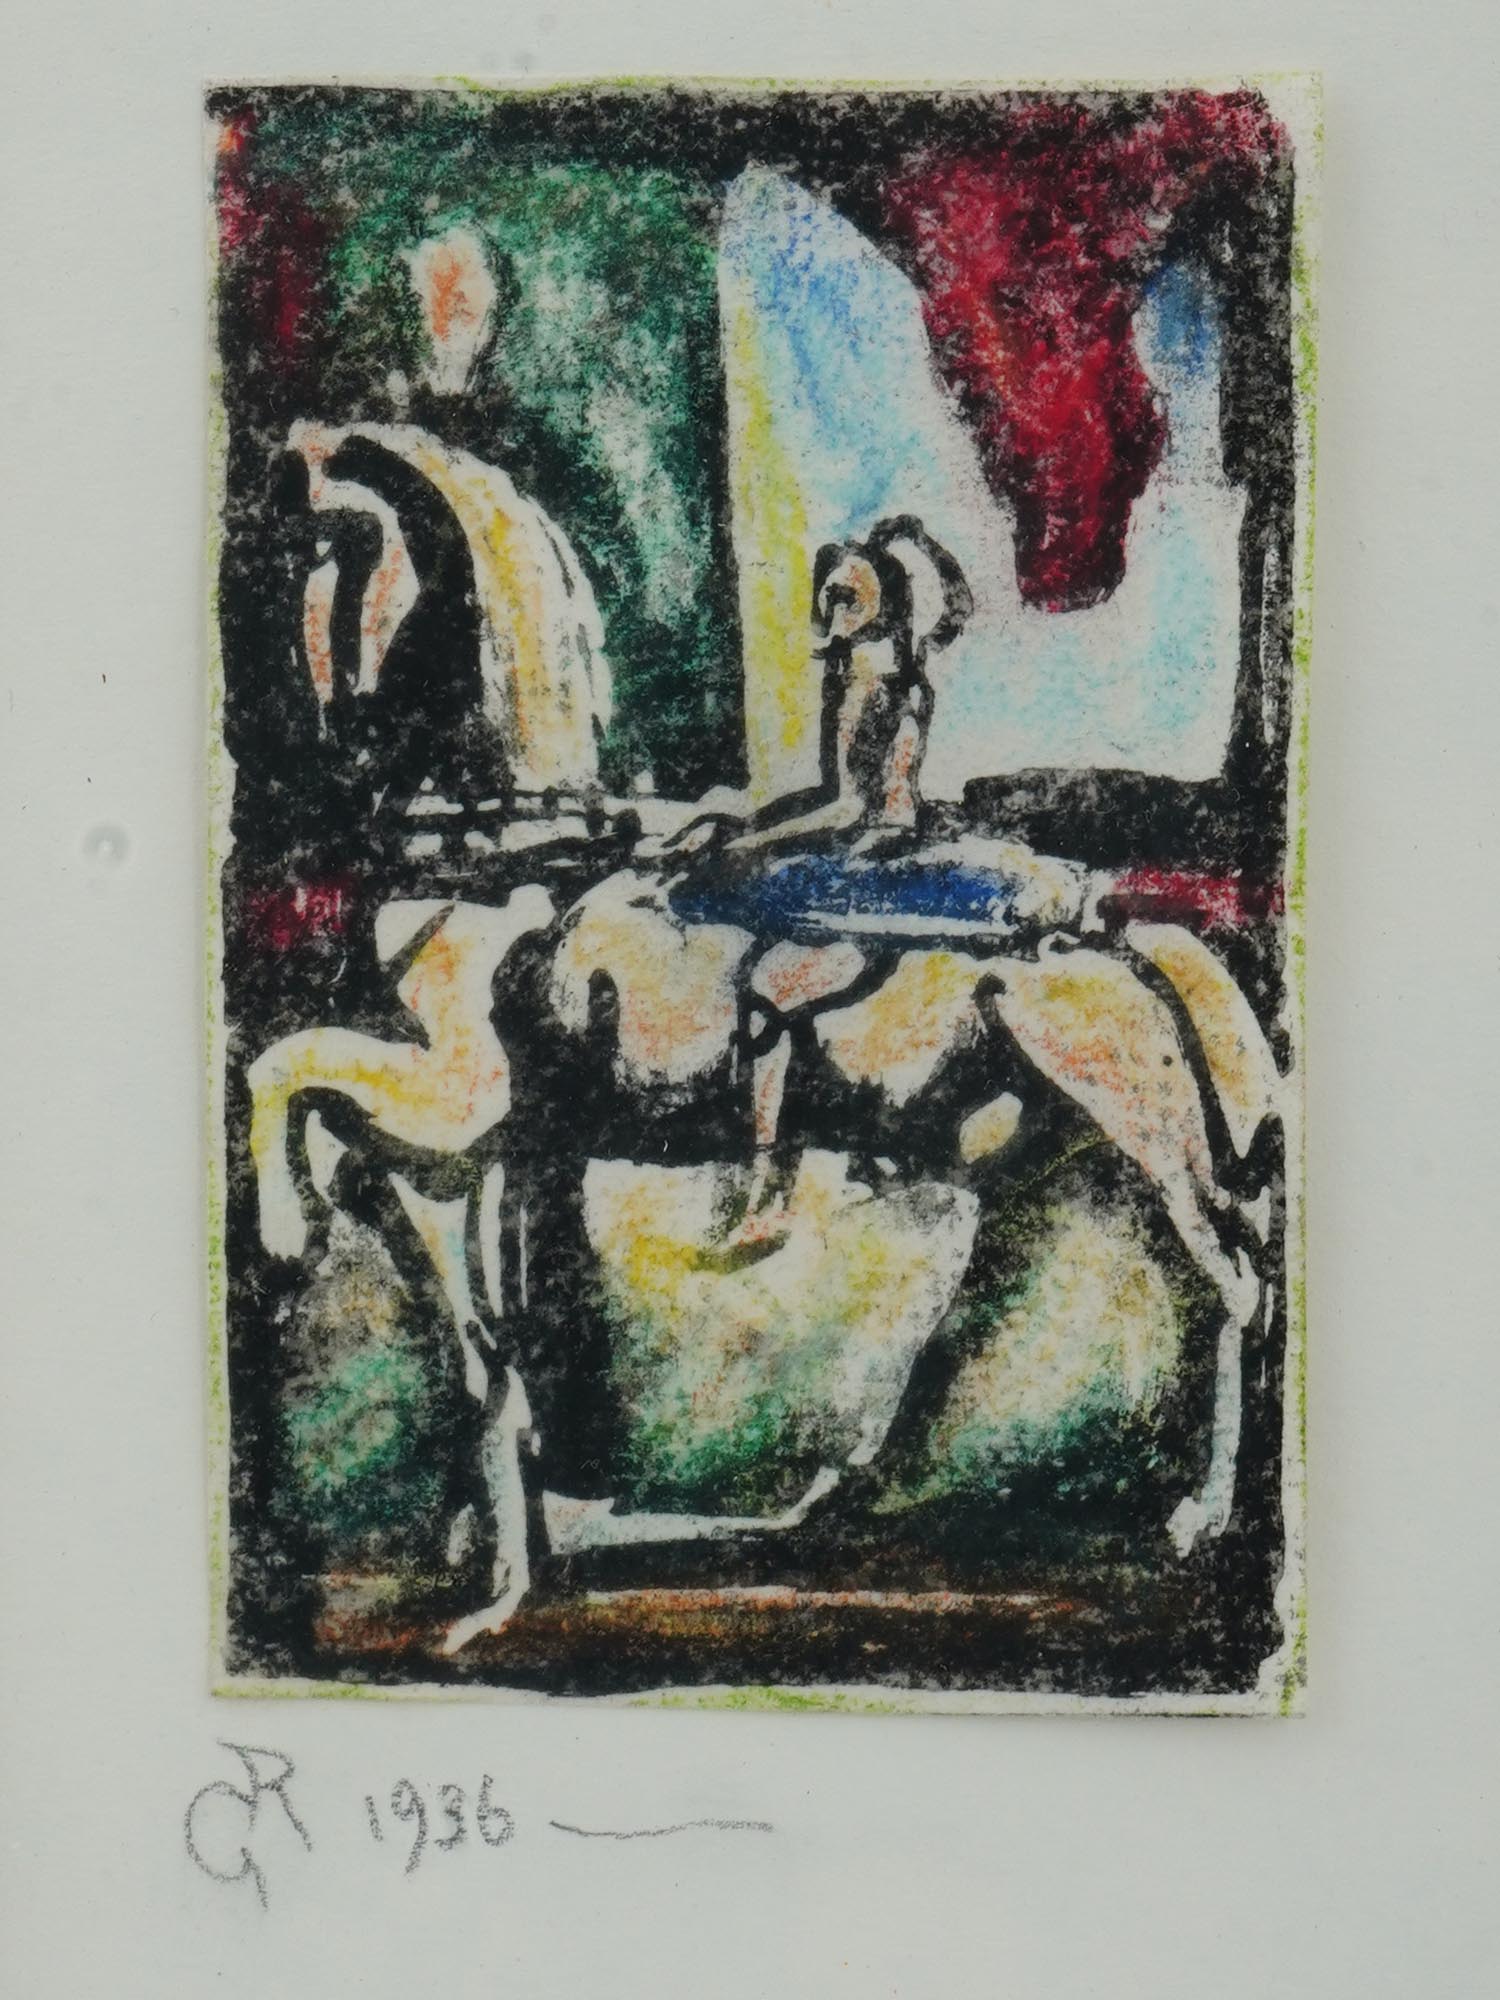 SIGNED COLORED LITHOGRAPH BY GEORGES ROUAULT 1936 PIC-1